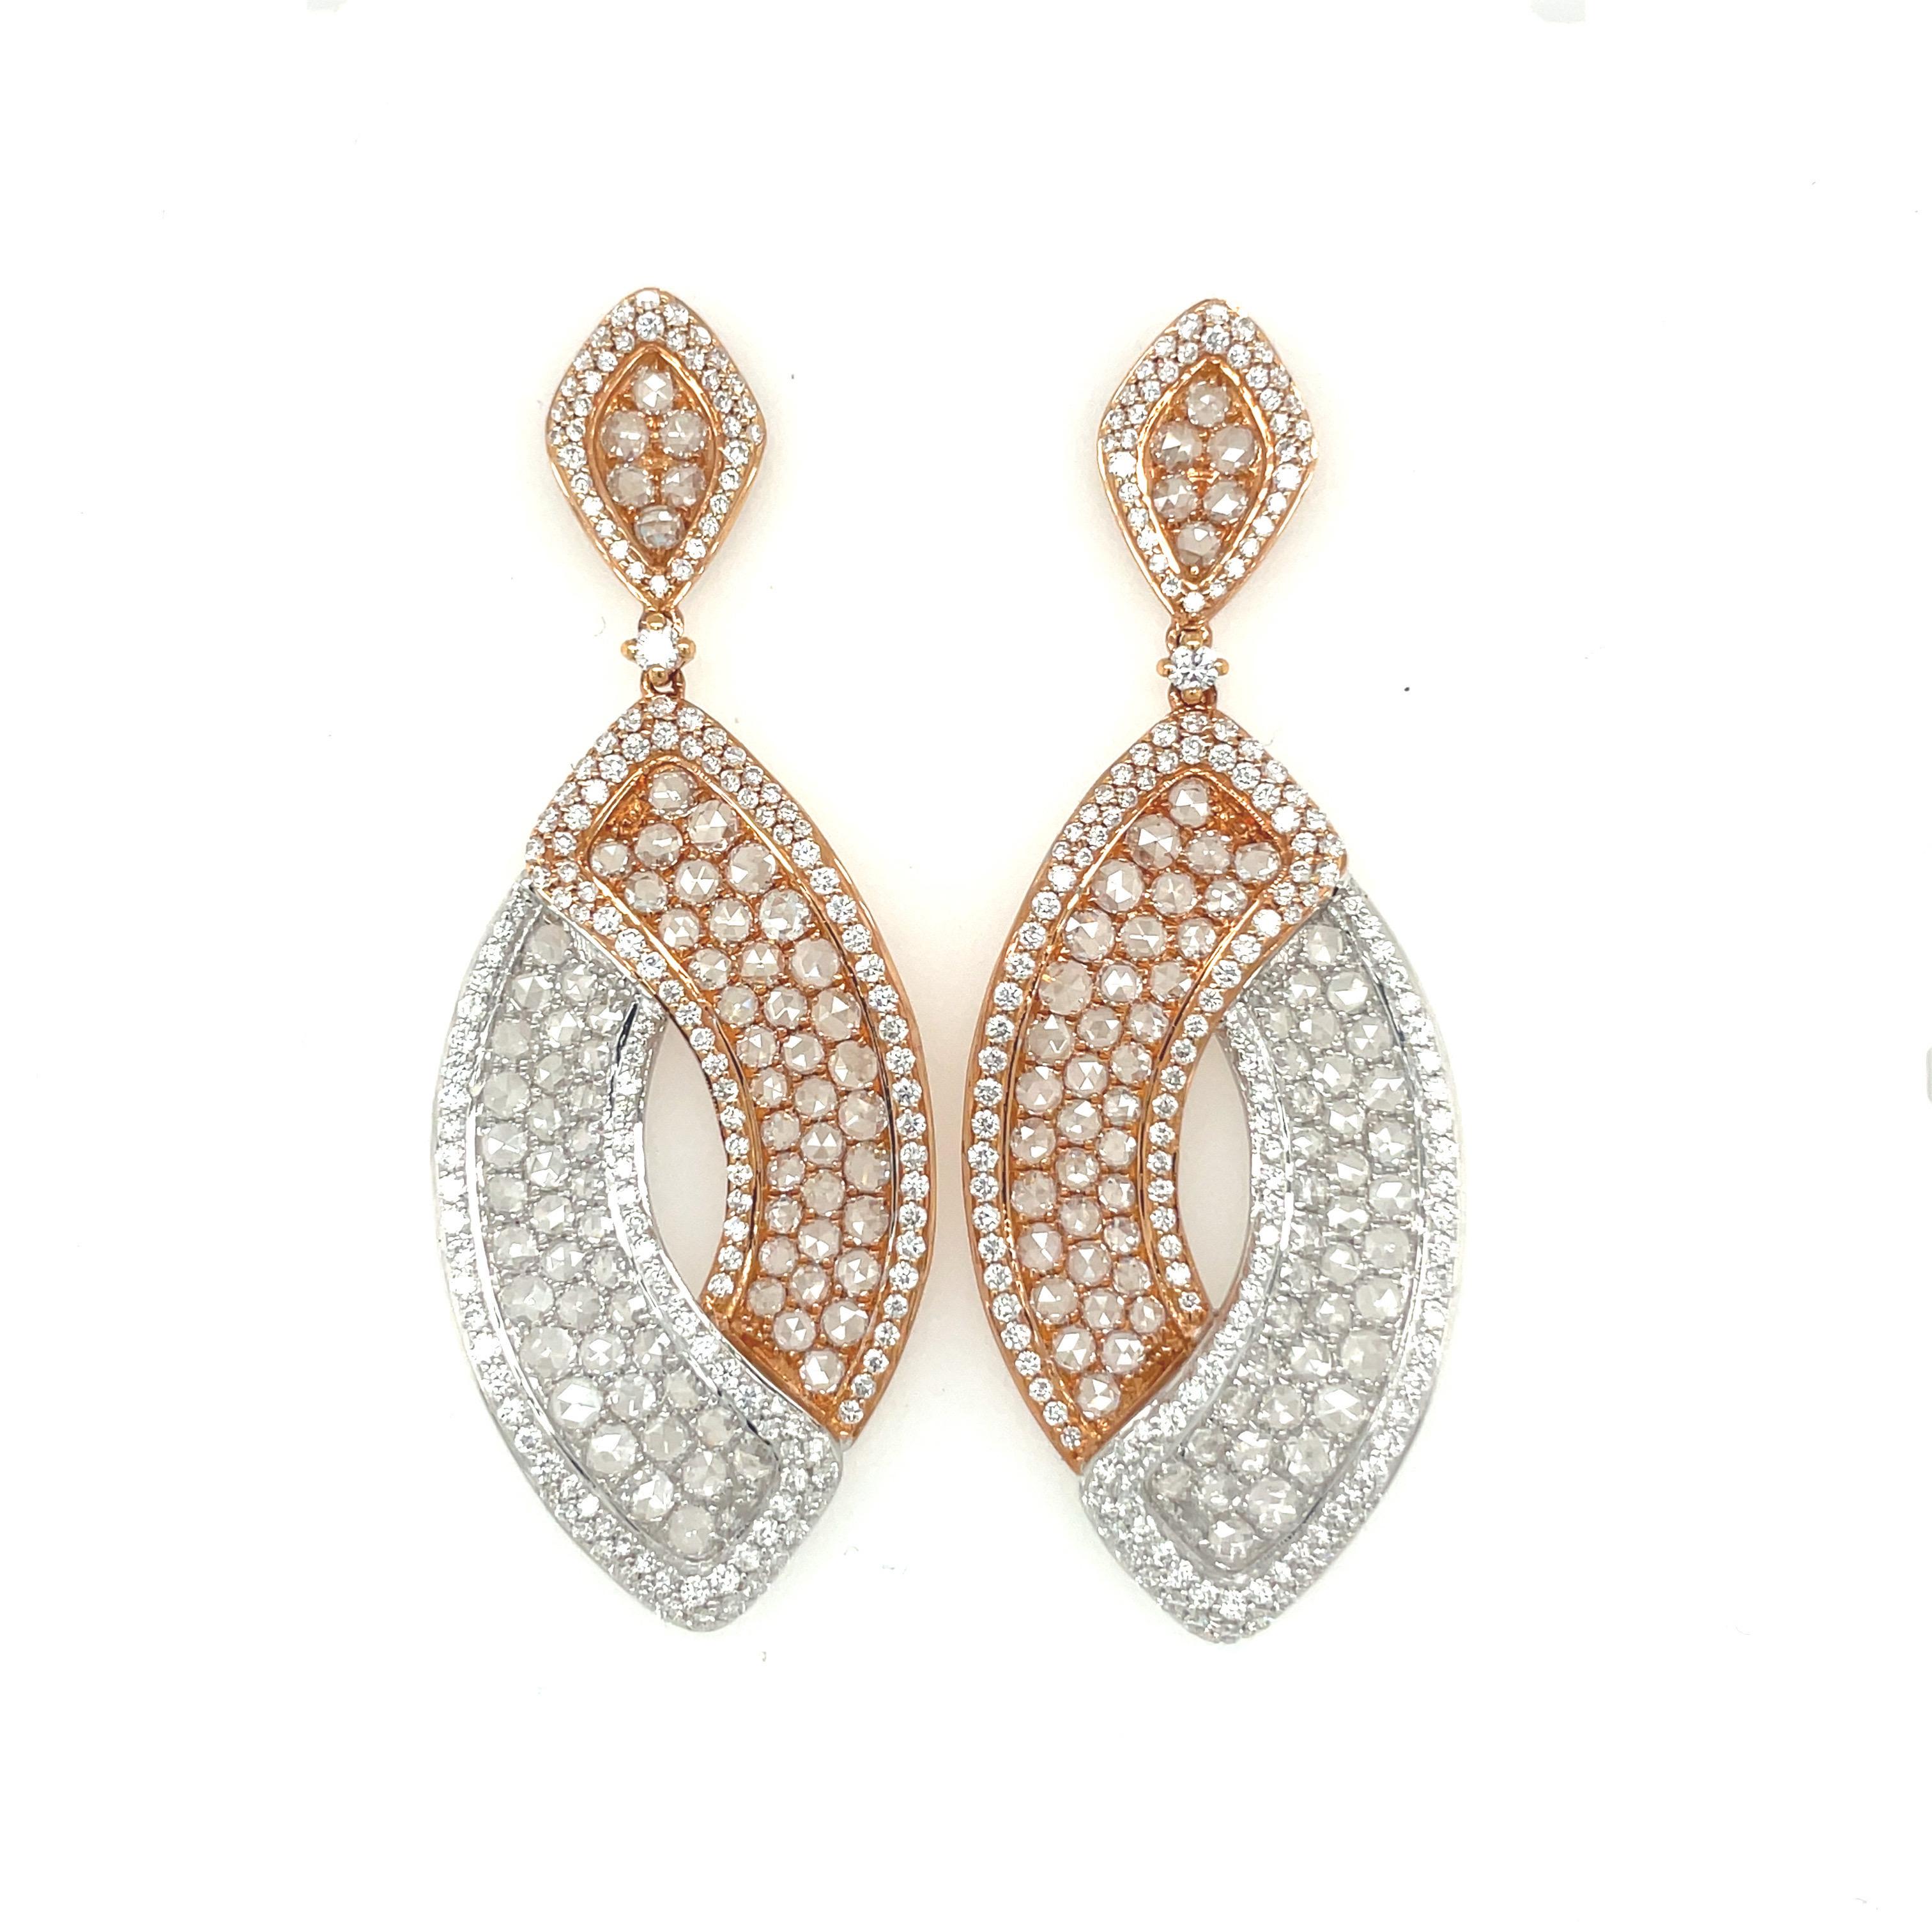 Set in 18-karat rose and white gold, these gorgeous and versatile earrings are composed of 2.30 carats of round diamonds surrounding 3.94 carats of rose-cut diamonds.
The sparkle of the diamonds are enhanced by the combination of diamond cuts, as